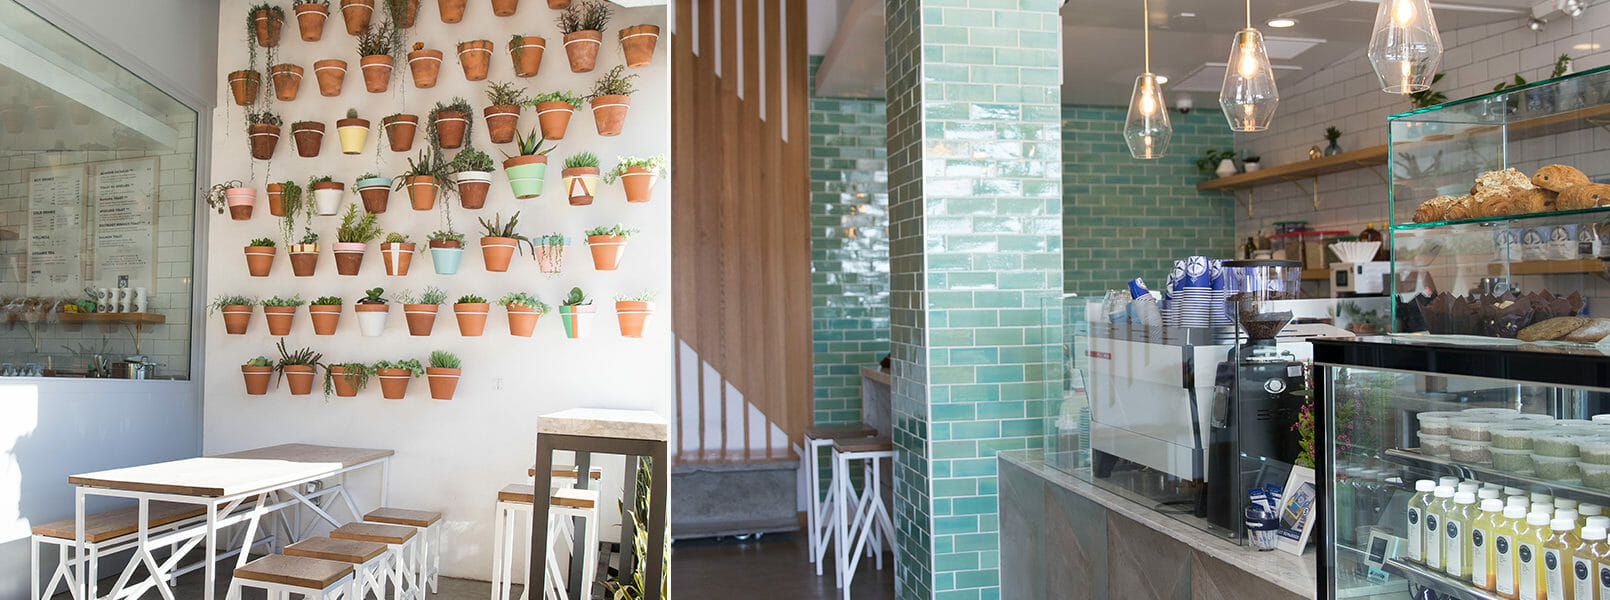 Interior of Bluestone Lane Santa Monica with teal and blue tiles along the wall and hanging pots with flowers.